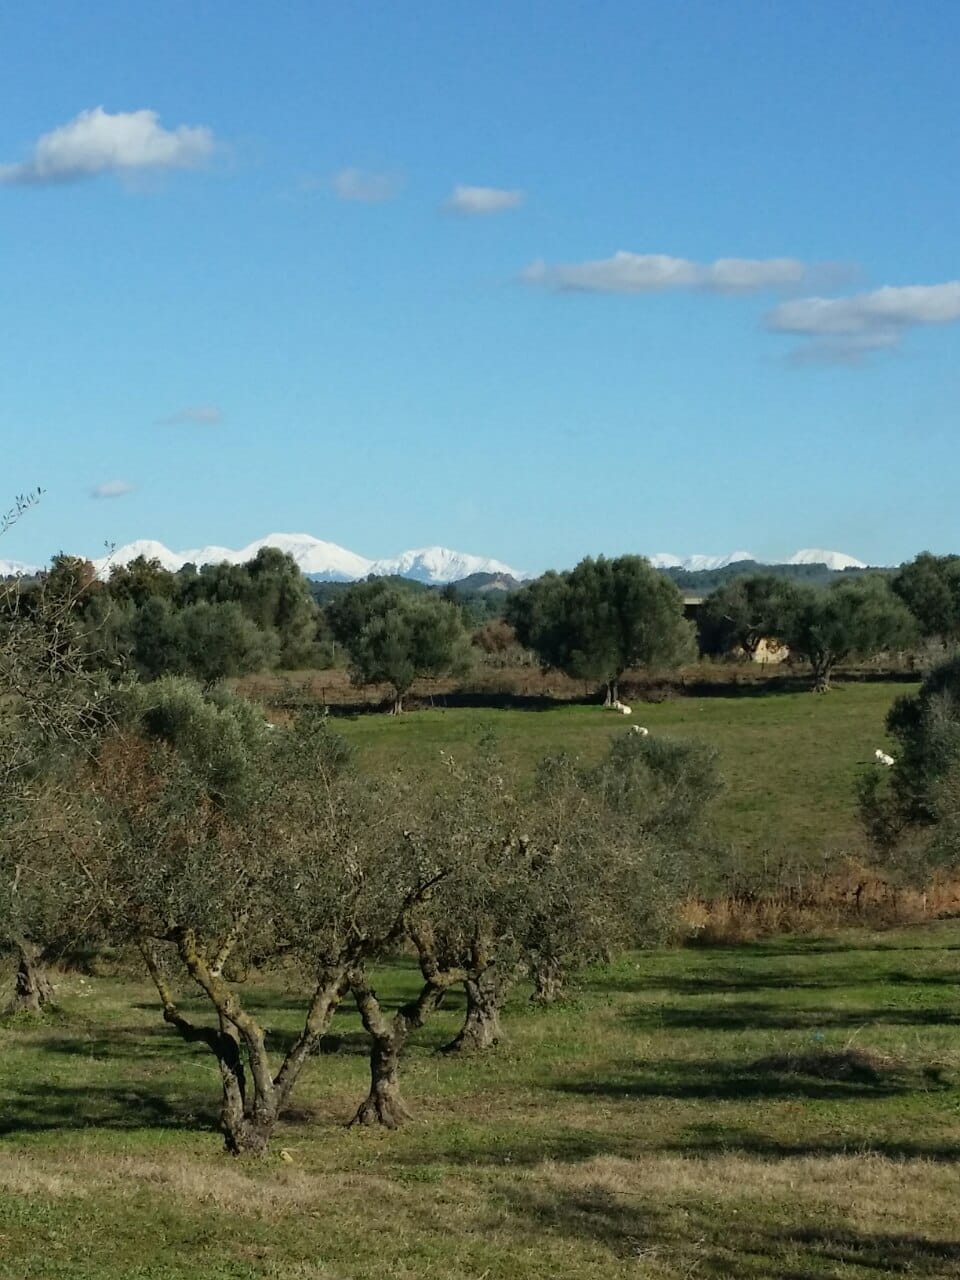 A kabos - field - of olive trees, goats and sheep grazing and the snow capped peaks of the Peloponnese mountains upon the blue horizon.